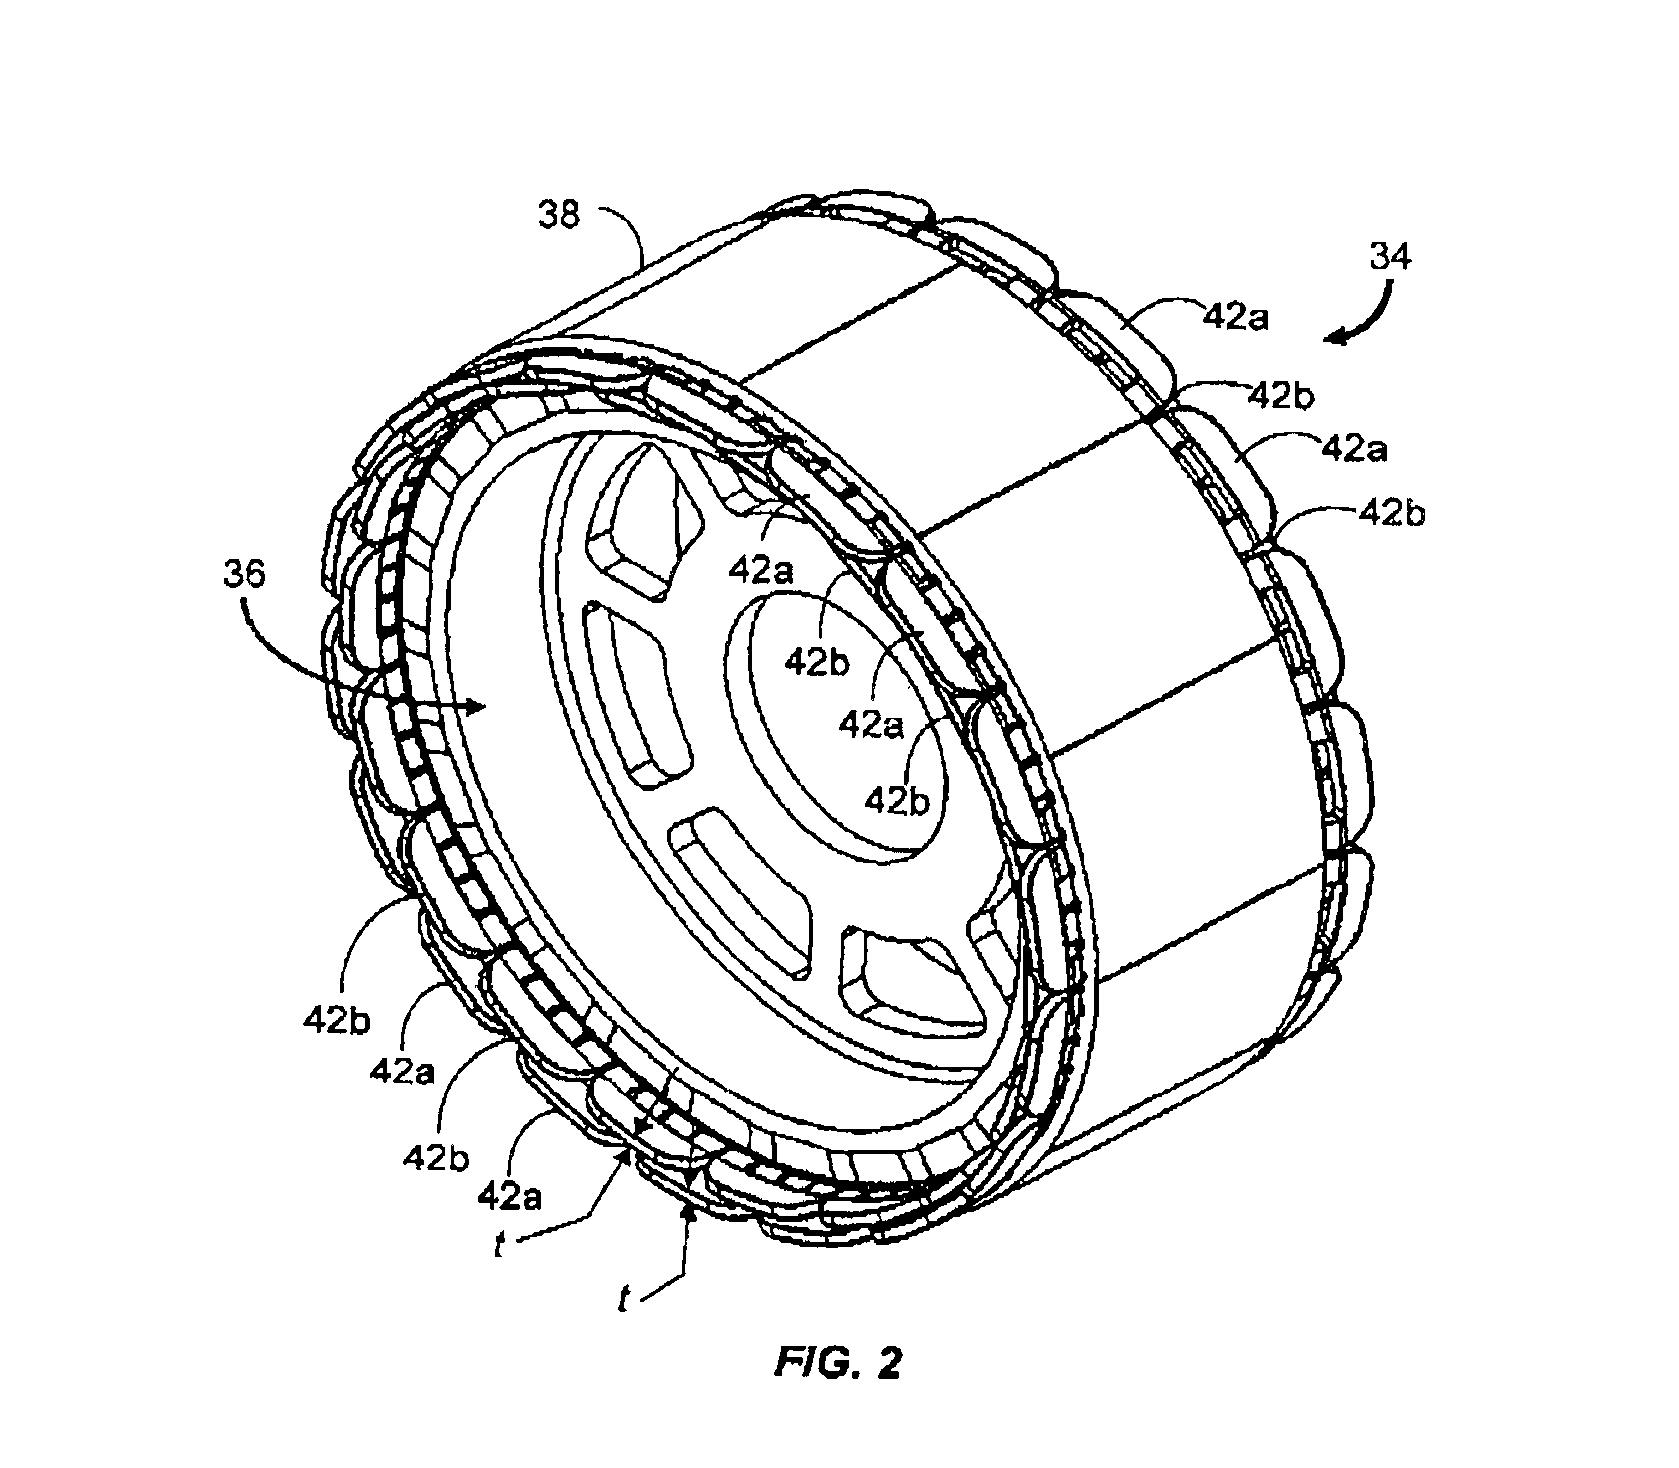 Nested stator coils for permanent magnet machines